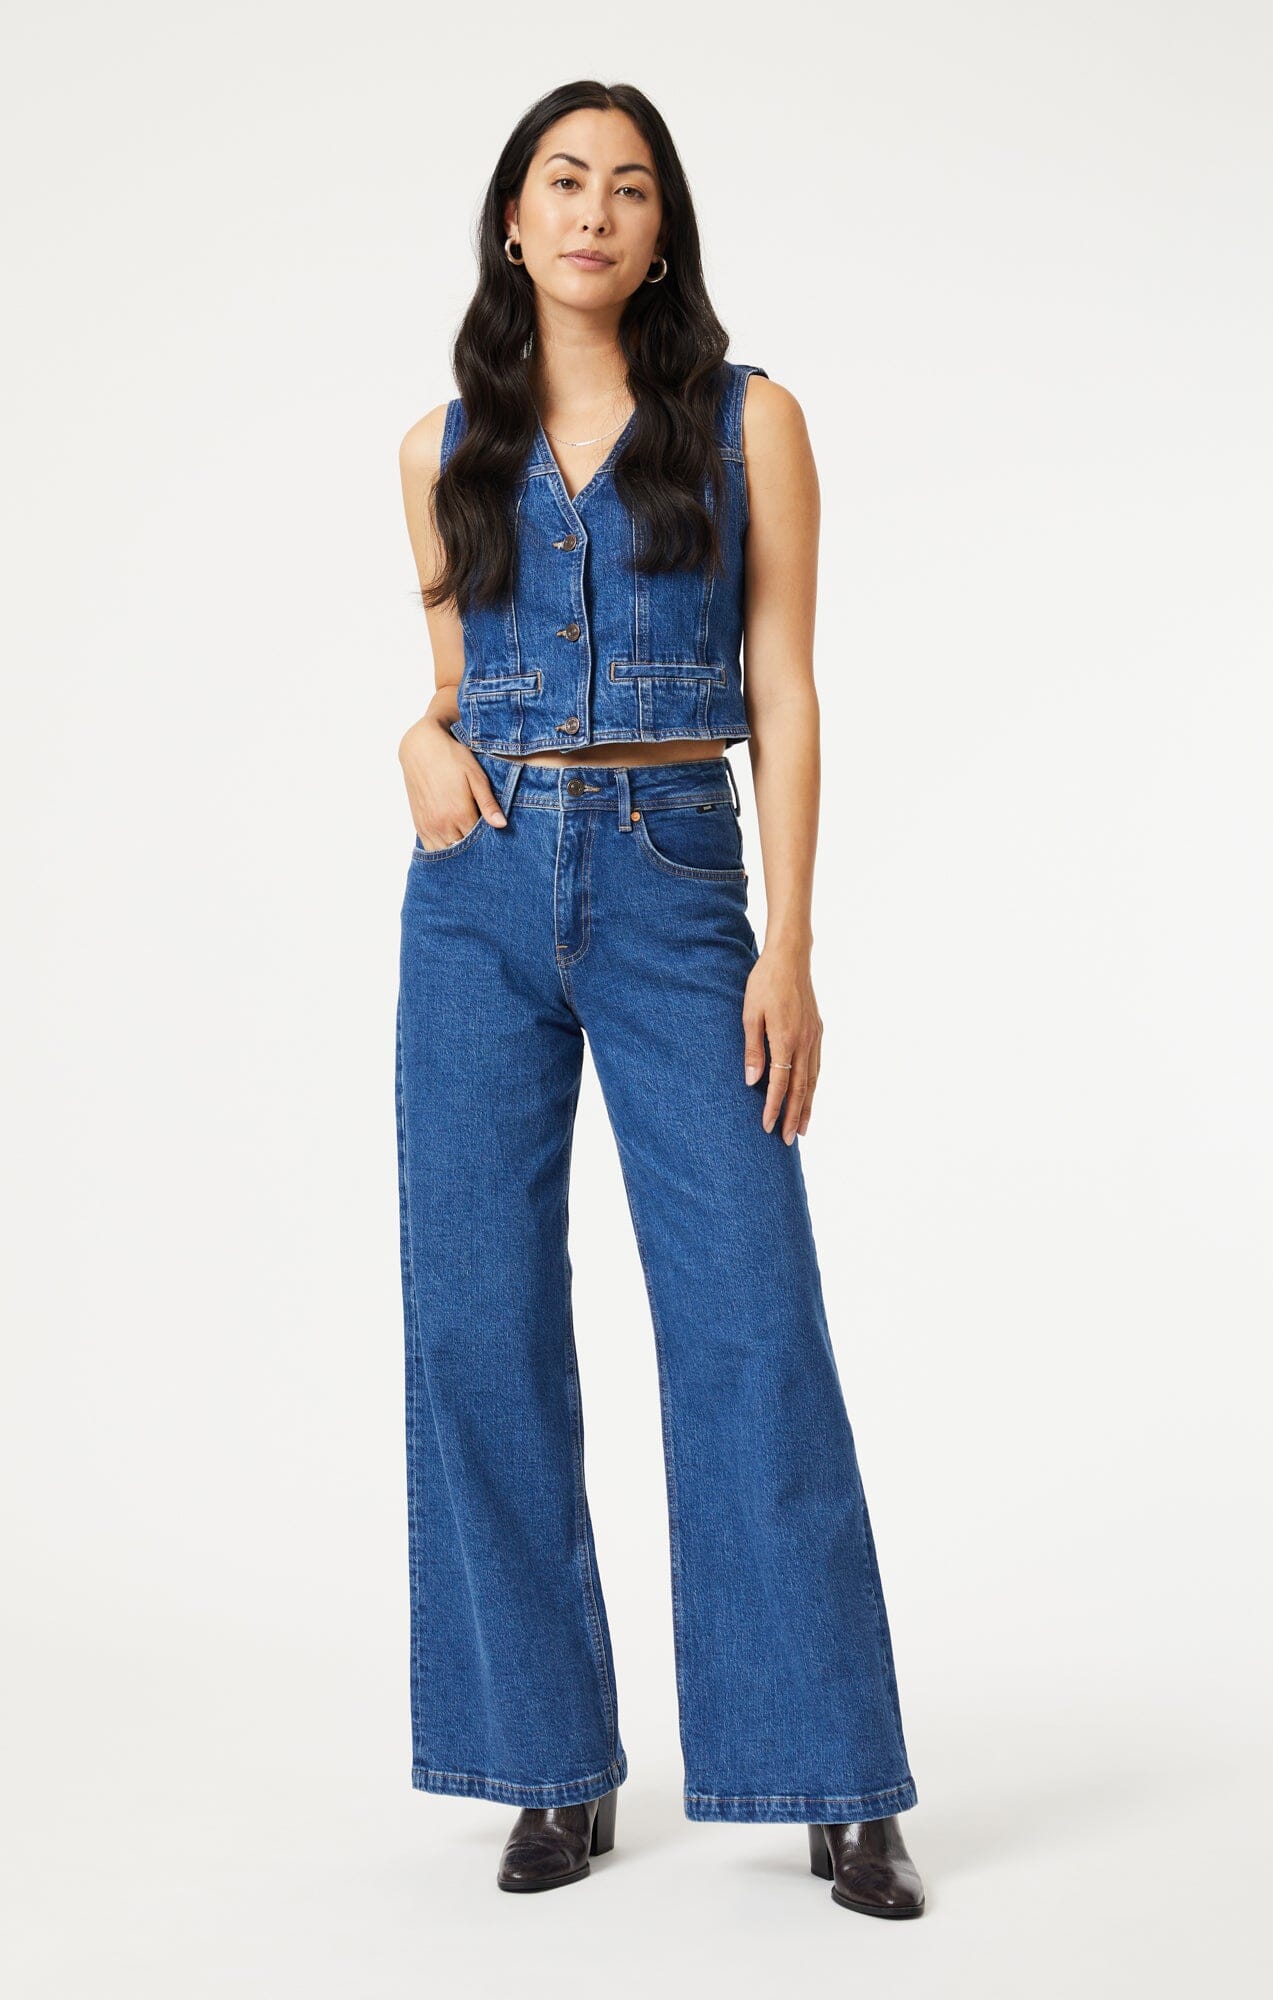 WR.UP® jeans with a high waist and super flare leg